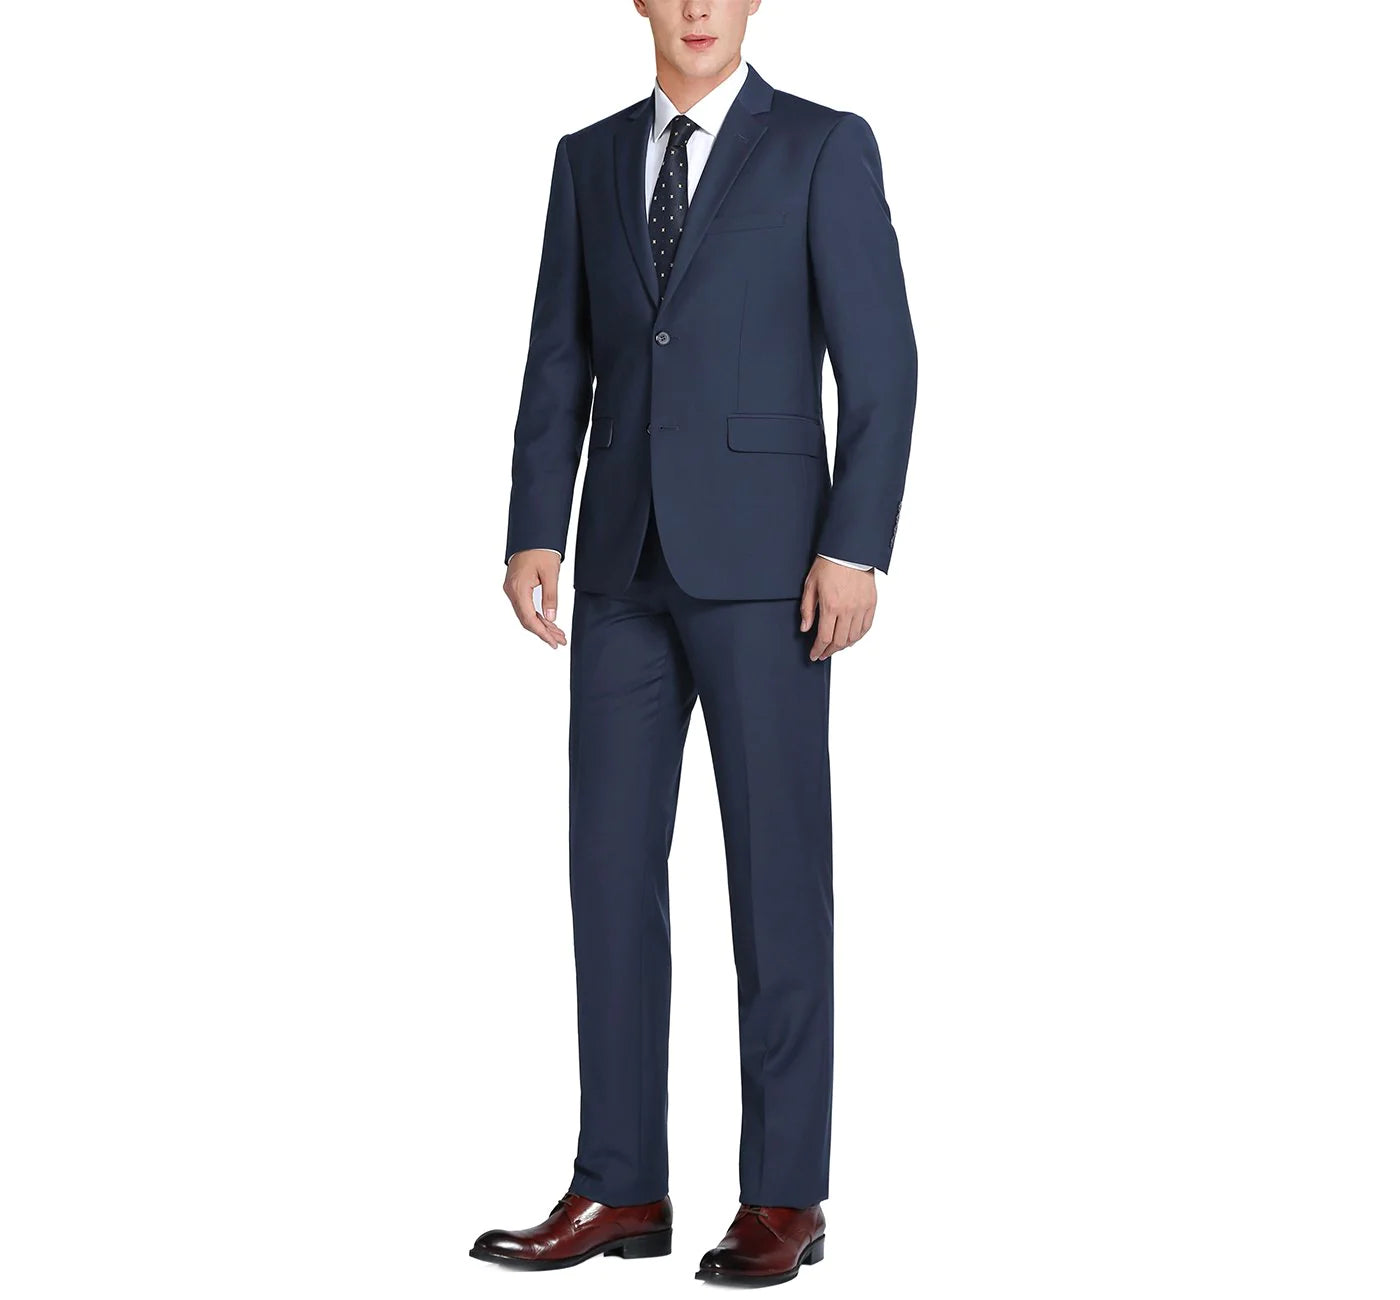 2BY2 100% WOOL (Two-Pant Suit) ***2 FOR $700.00 – 2BY2 MISSION GEAR